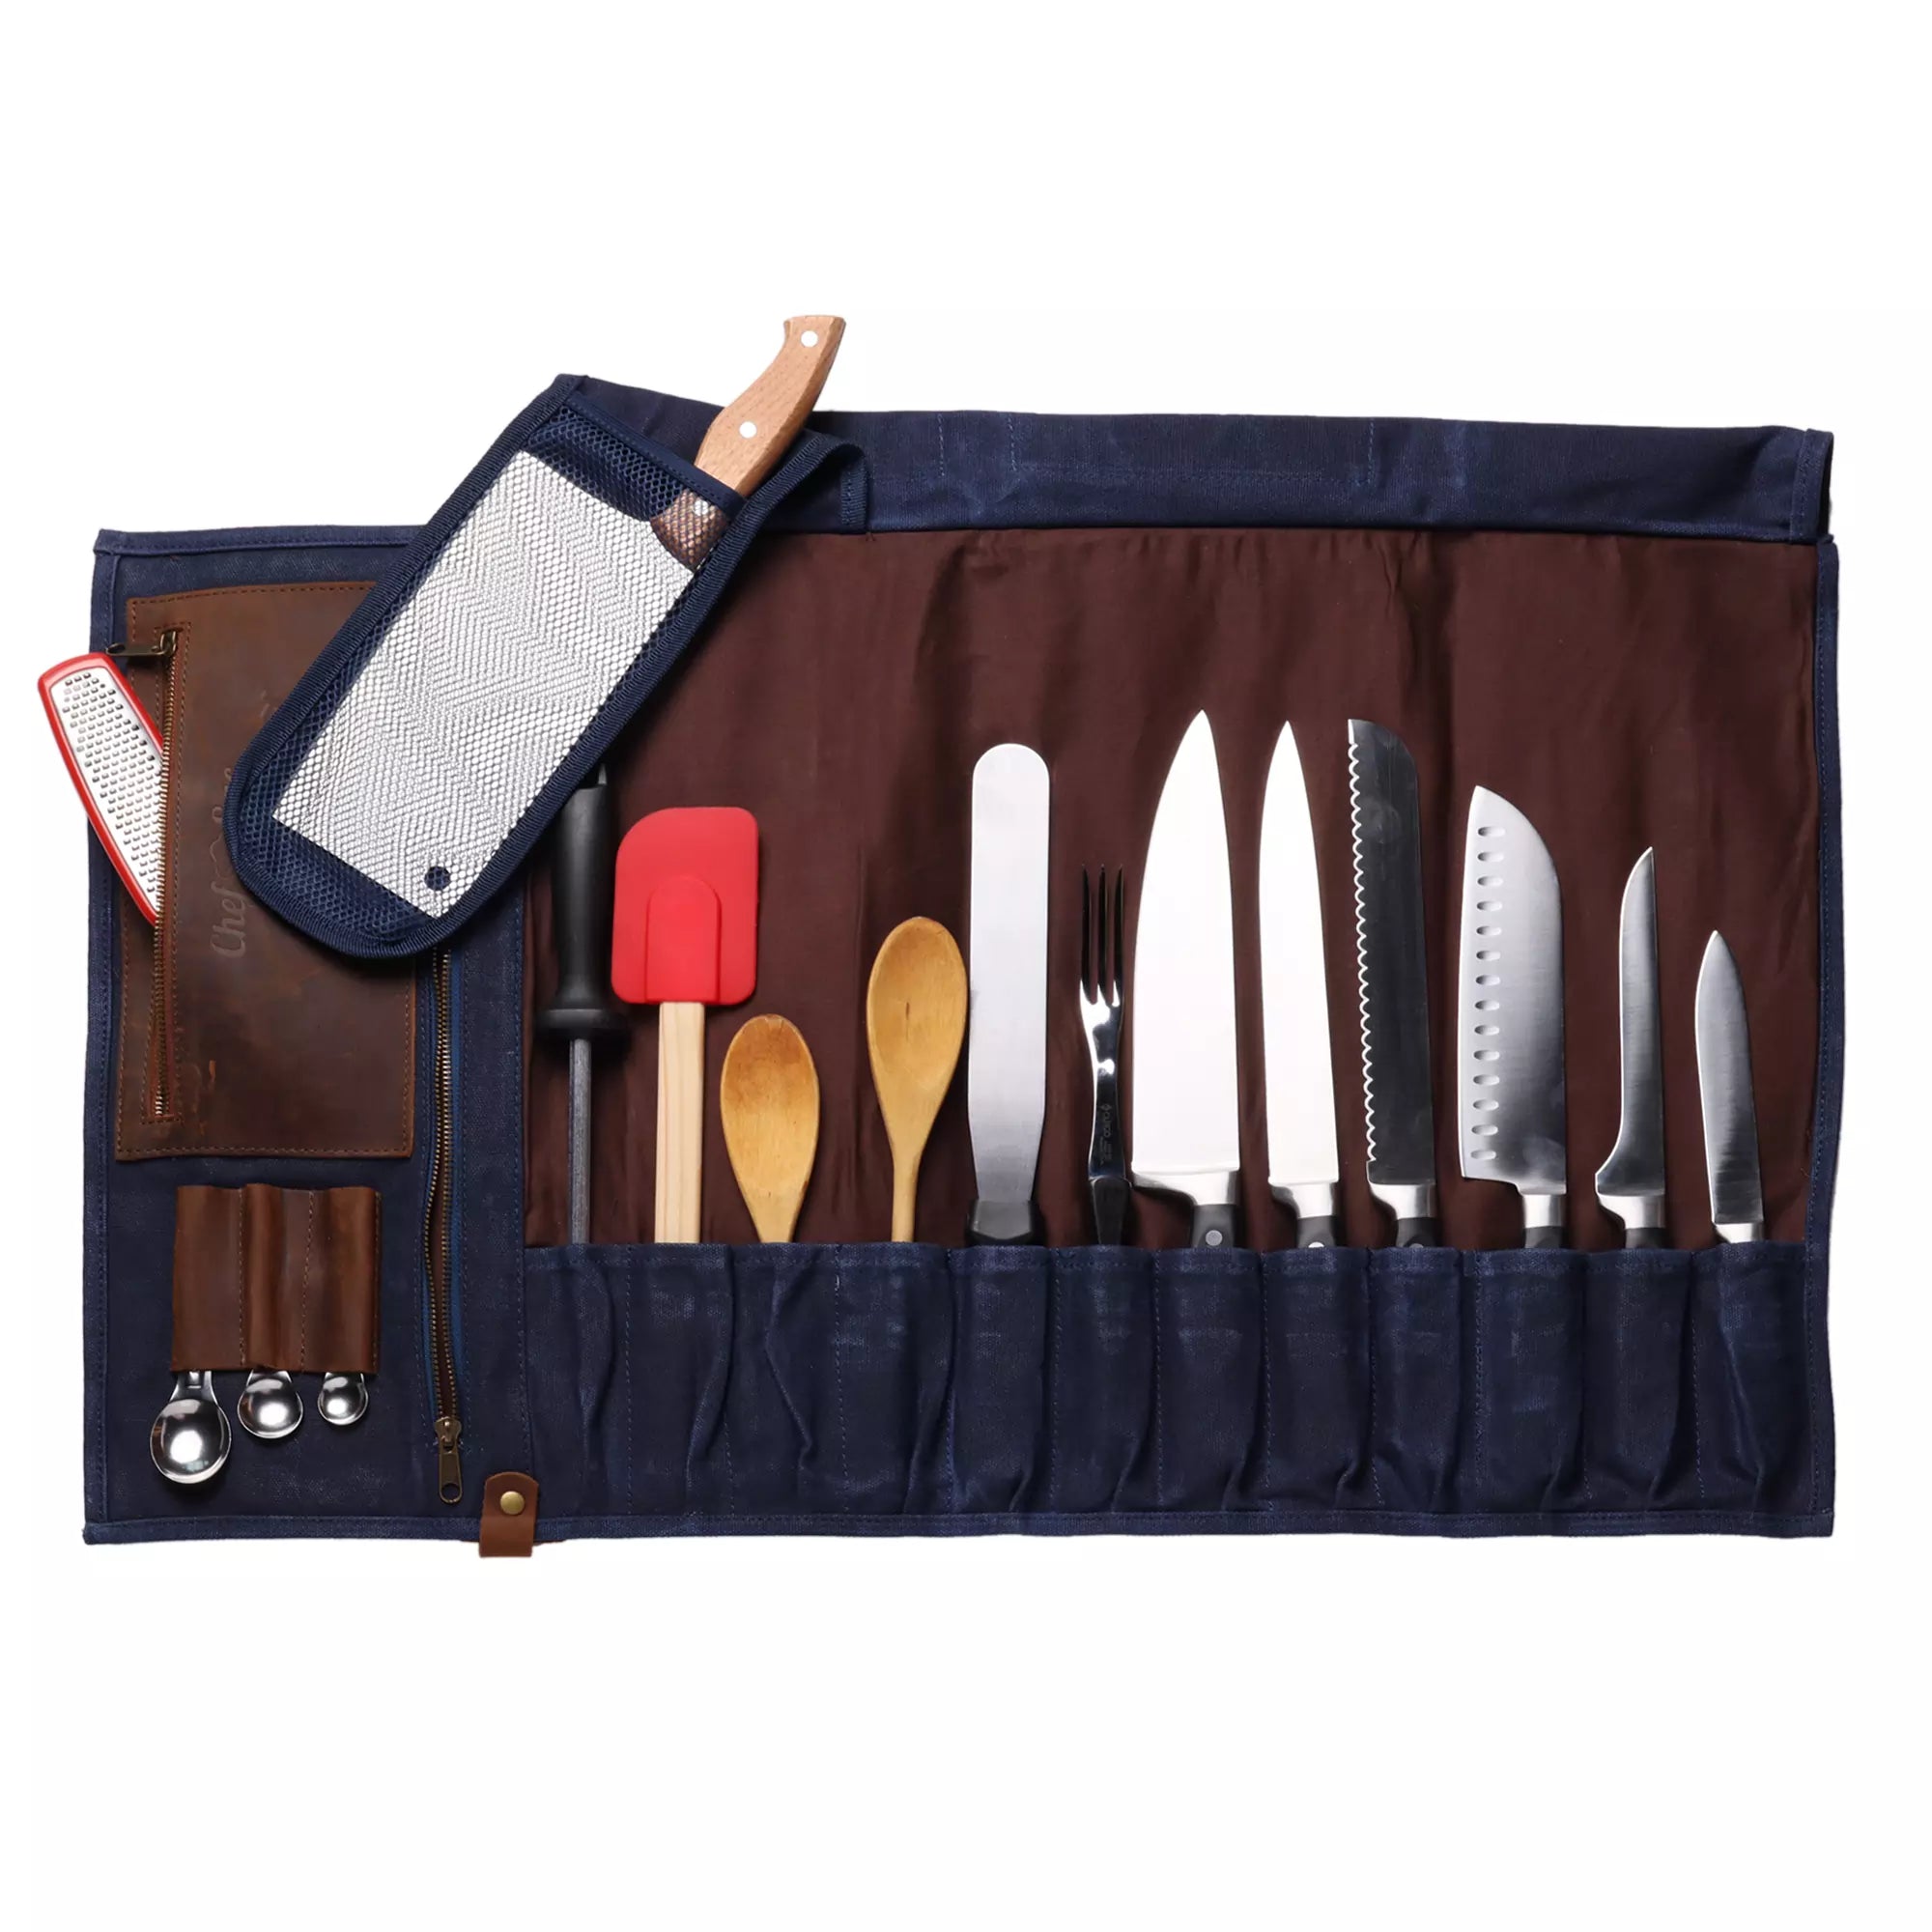 KOTAI Chef Knife Roll-up Bag - Leather & Canvas